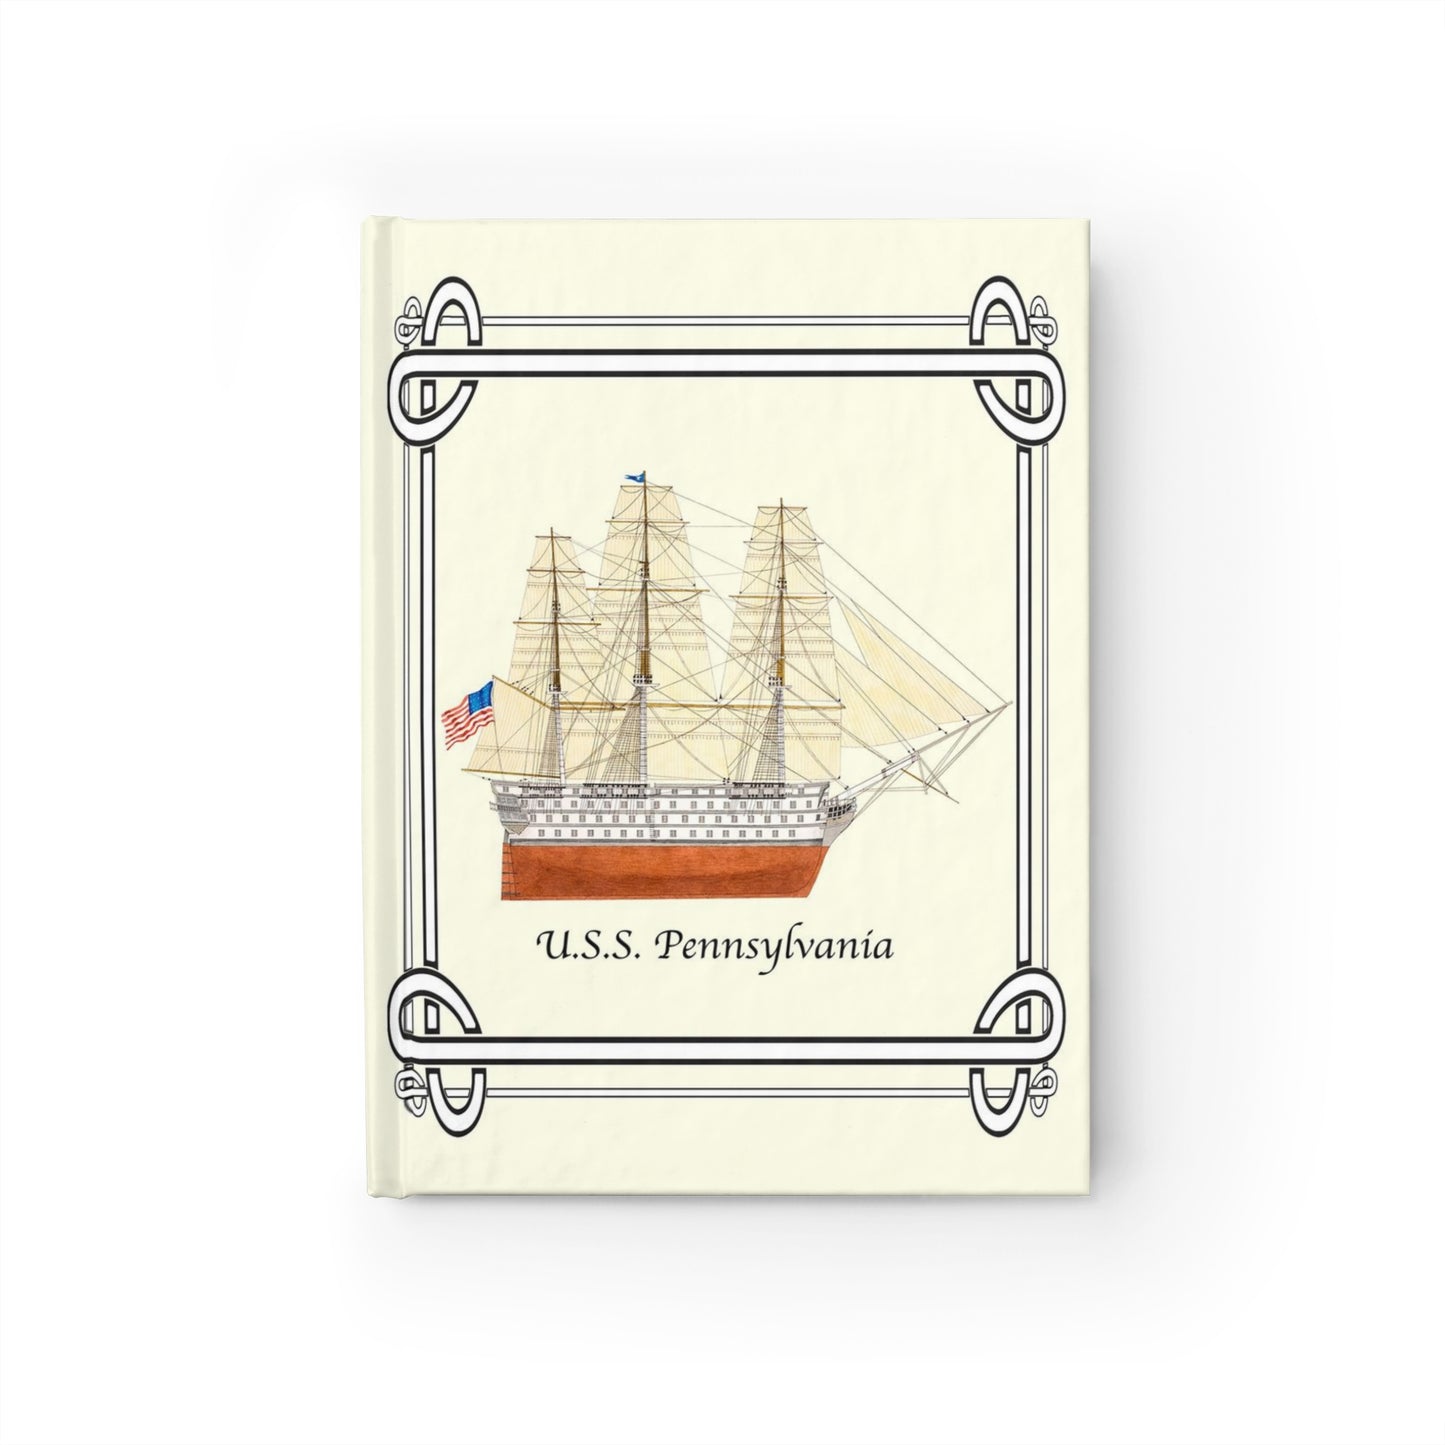 The U.S.S. Pennsylvania was a 120 gun first-rate ship of the line. A handsome Journal for the sailing enthusiast!   The journal design is a reproduction of an original watercolor by Lee M. Buchanan and has the image on the front and back of the book